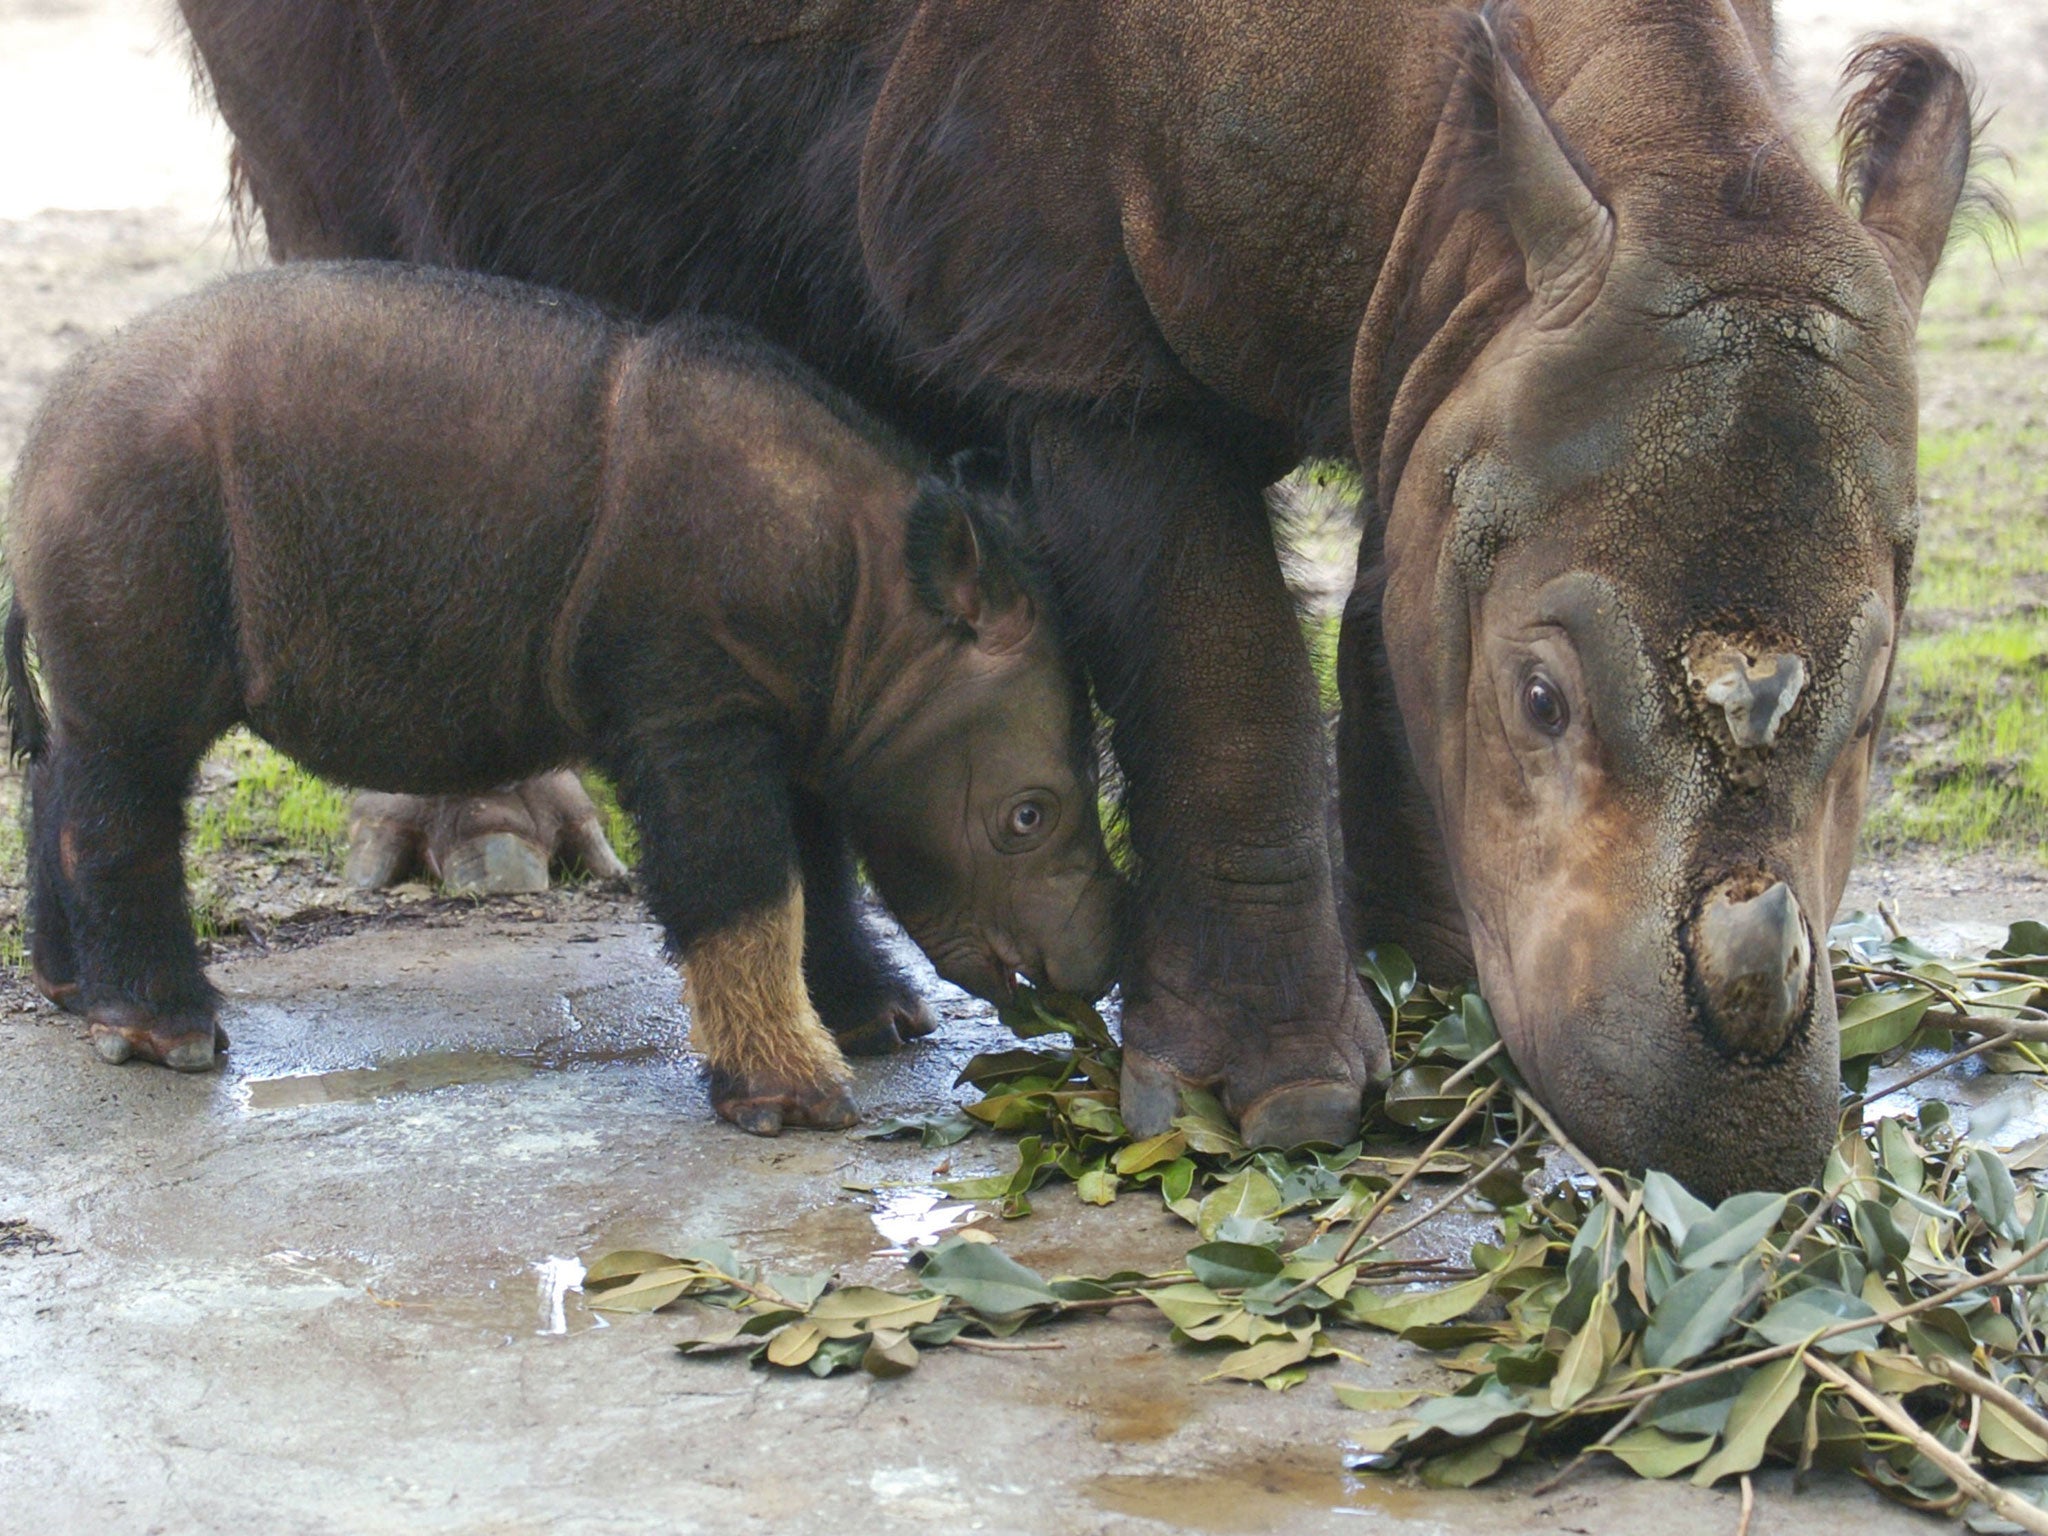 Sumatran rhinos have not been seen in the wild since 2007